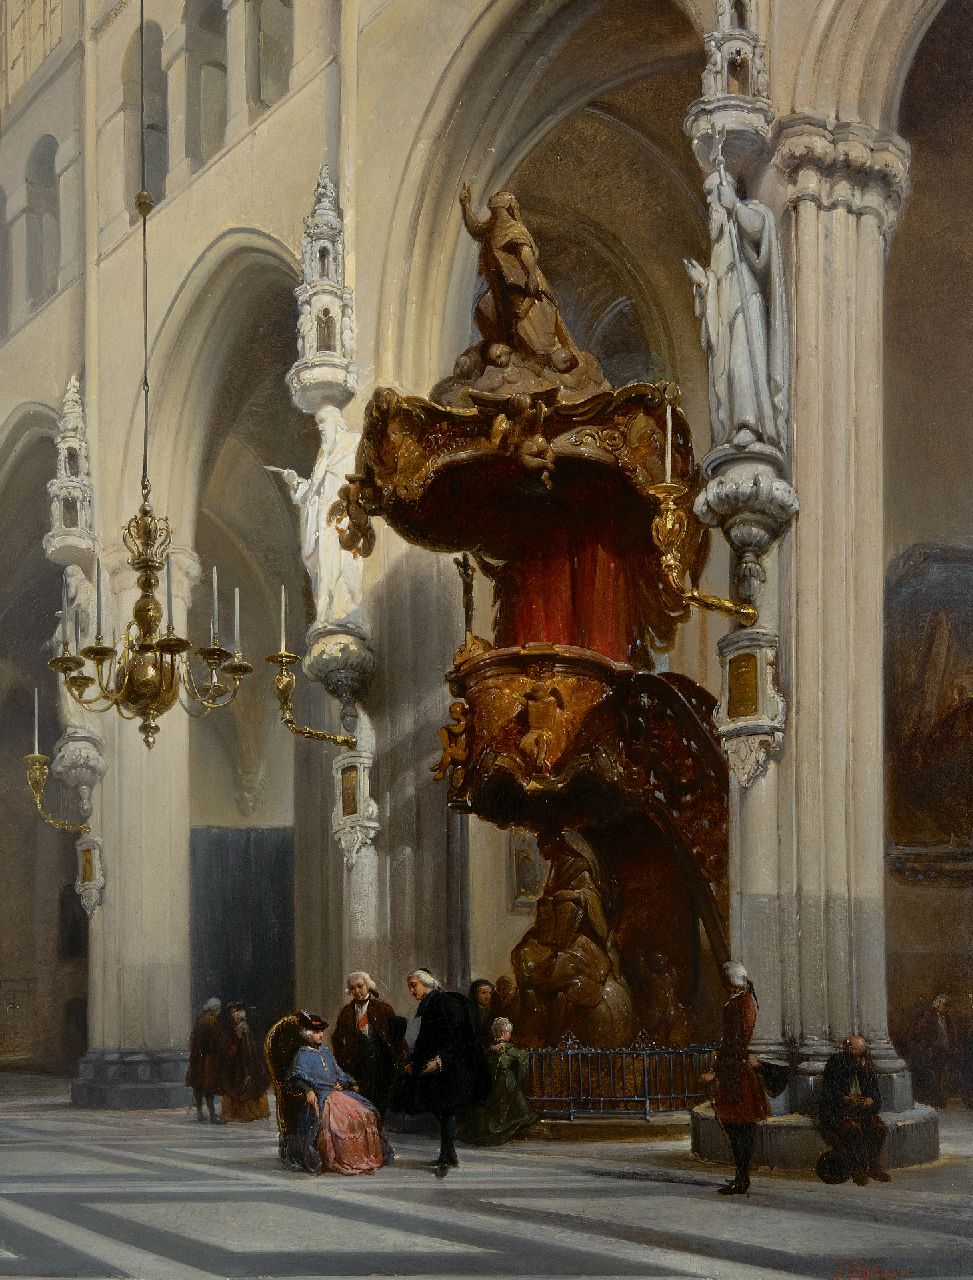 Bosboom J.  | Johannes Bosboom | Paintings offered for sale | Interior of the Onze Lieve Vrouwe church in Bruges, oil on panel 67.9 x 51.8 cm, signed l.r.